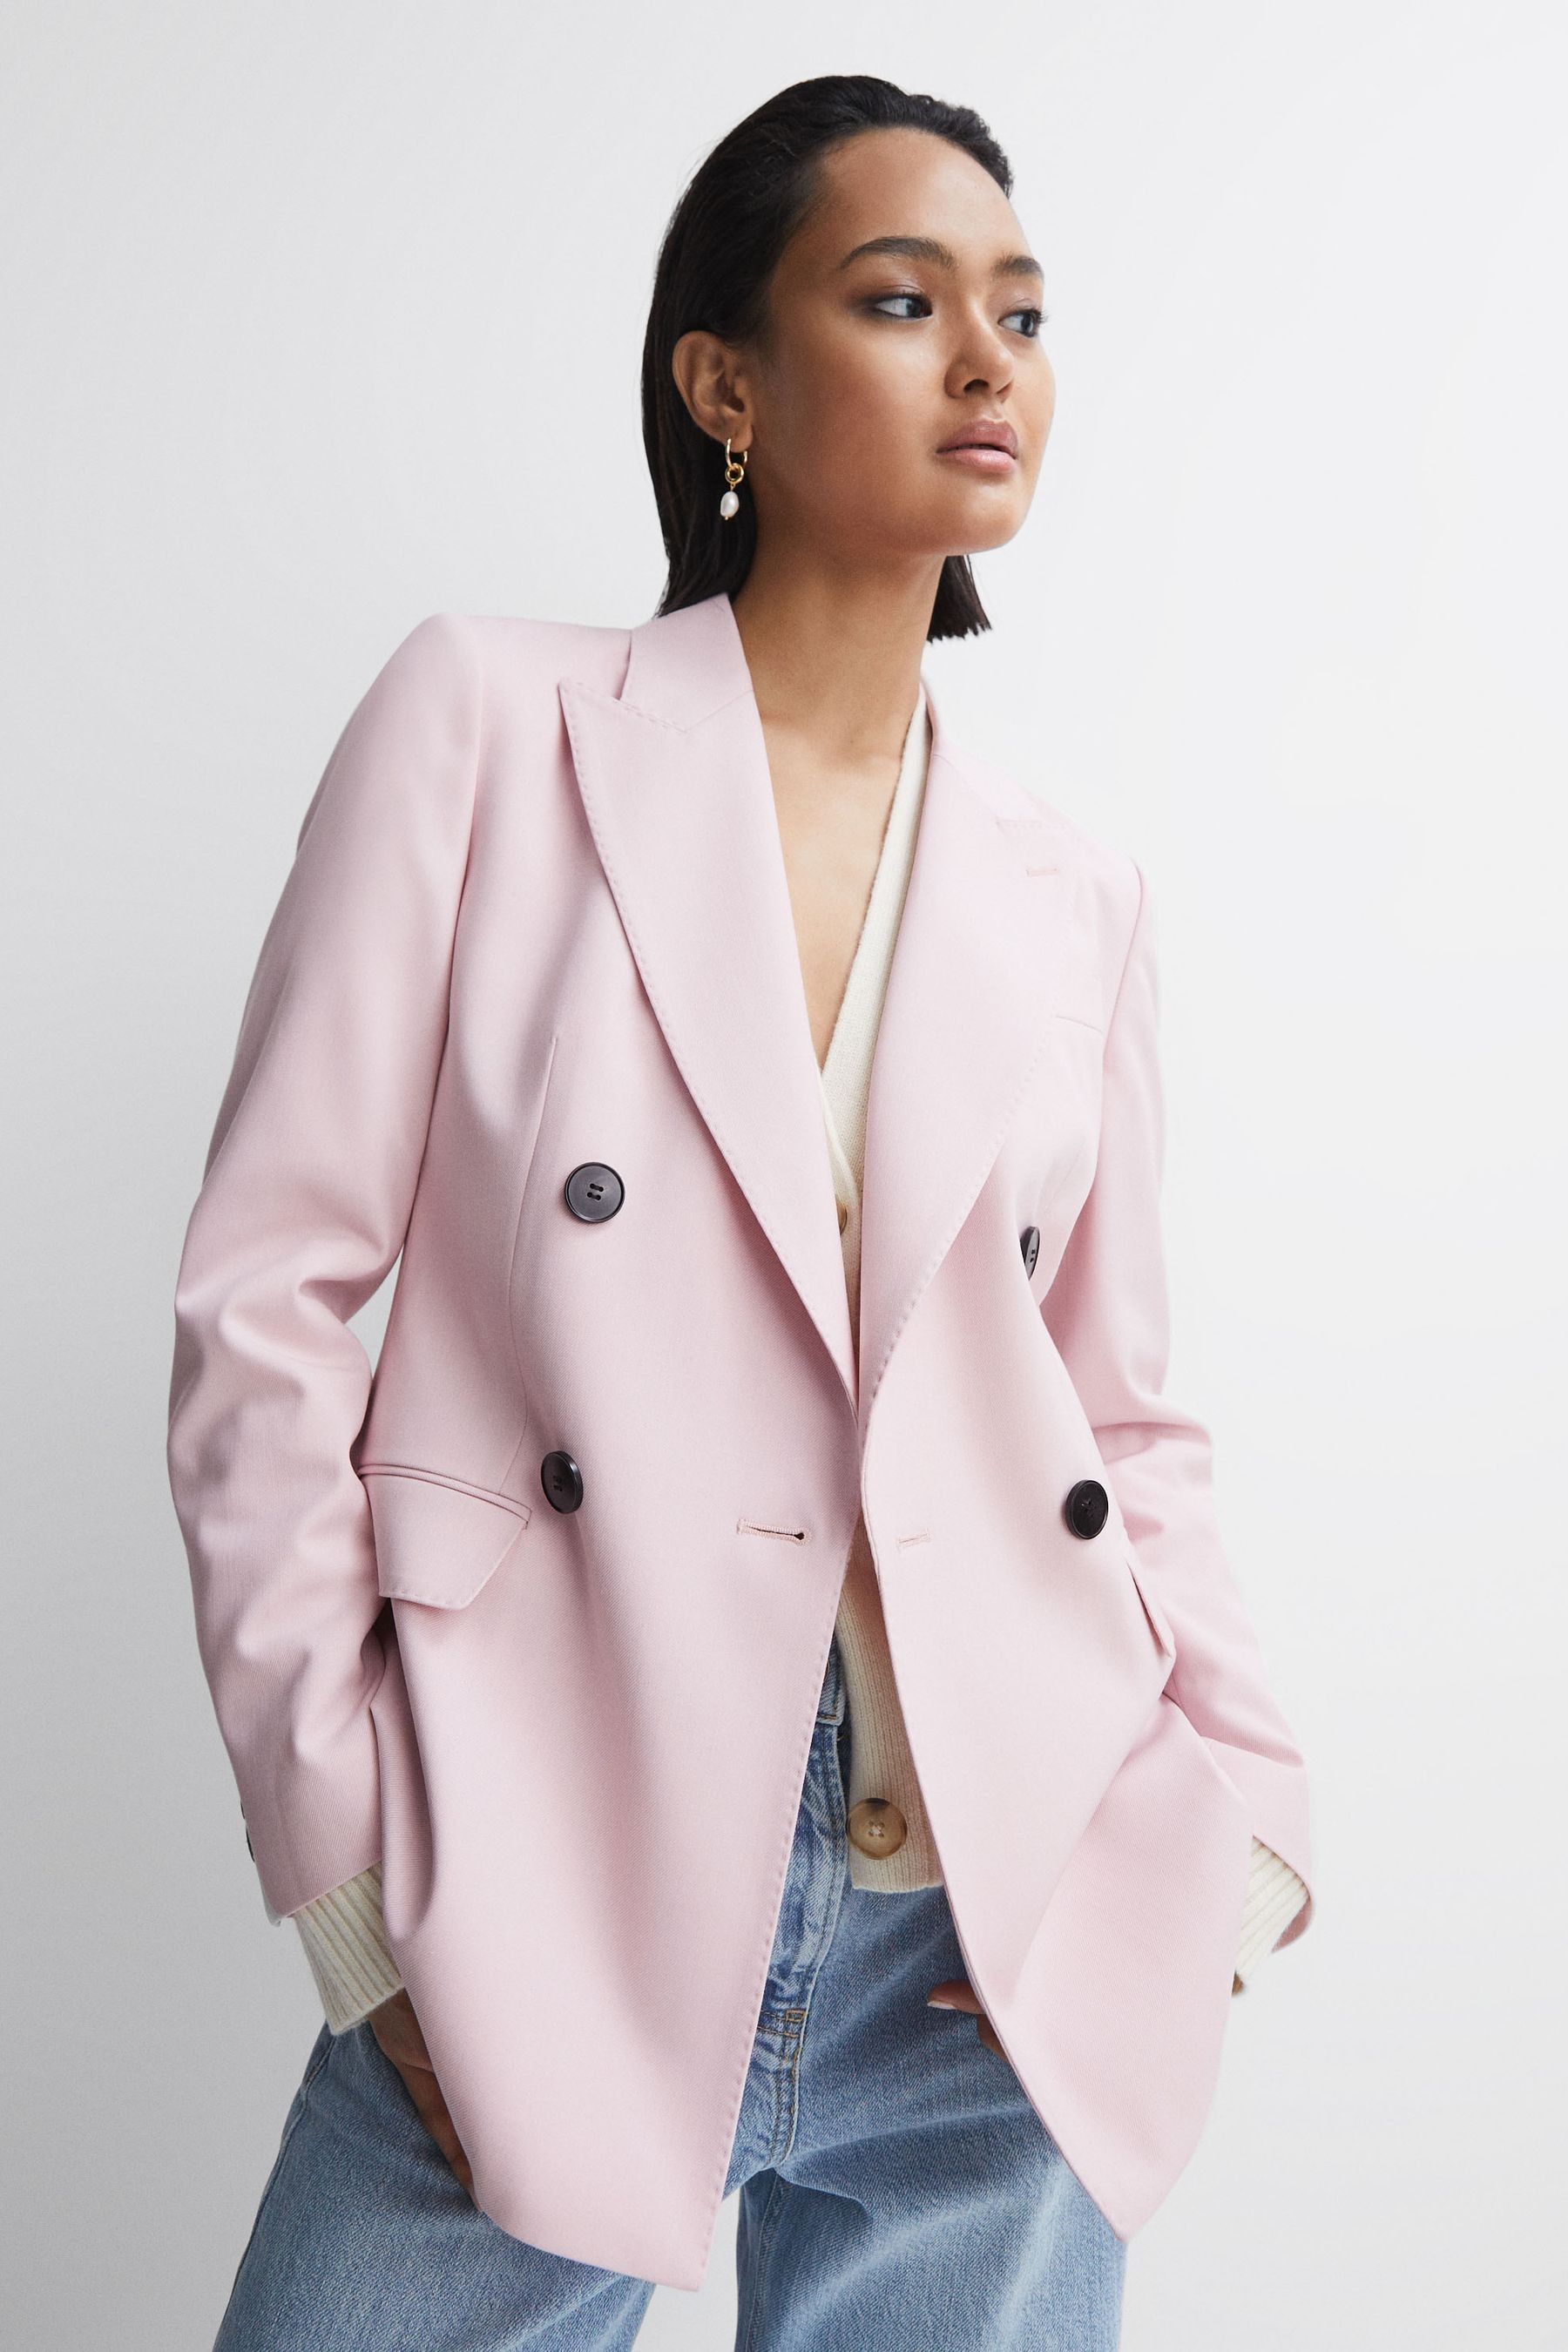 Reiss Evelyn - Pink Tailored Wool Blend Double Breasted Blazer, Us 8